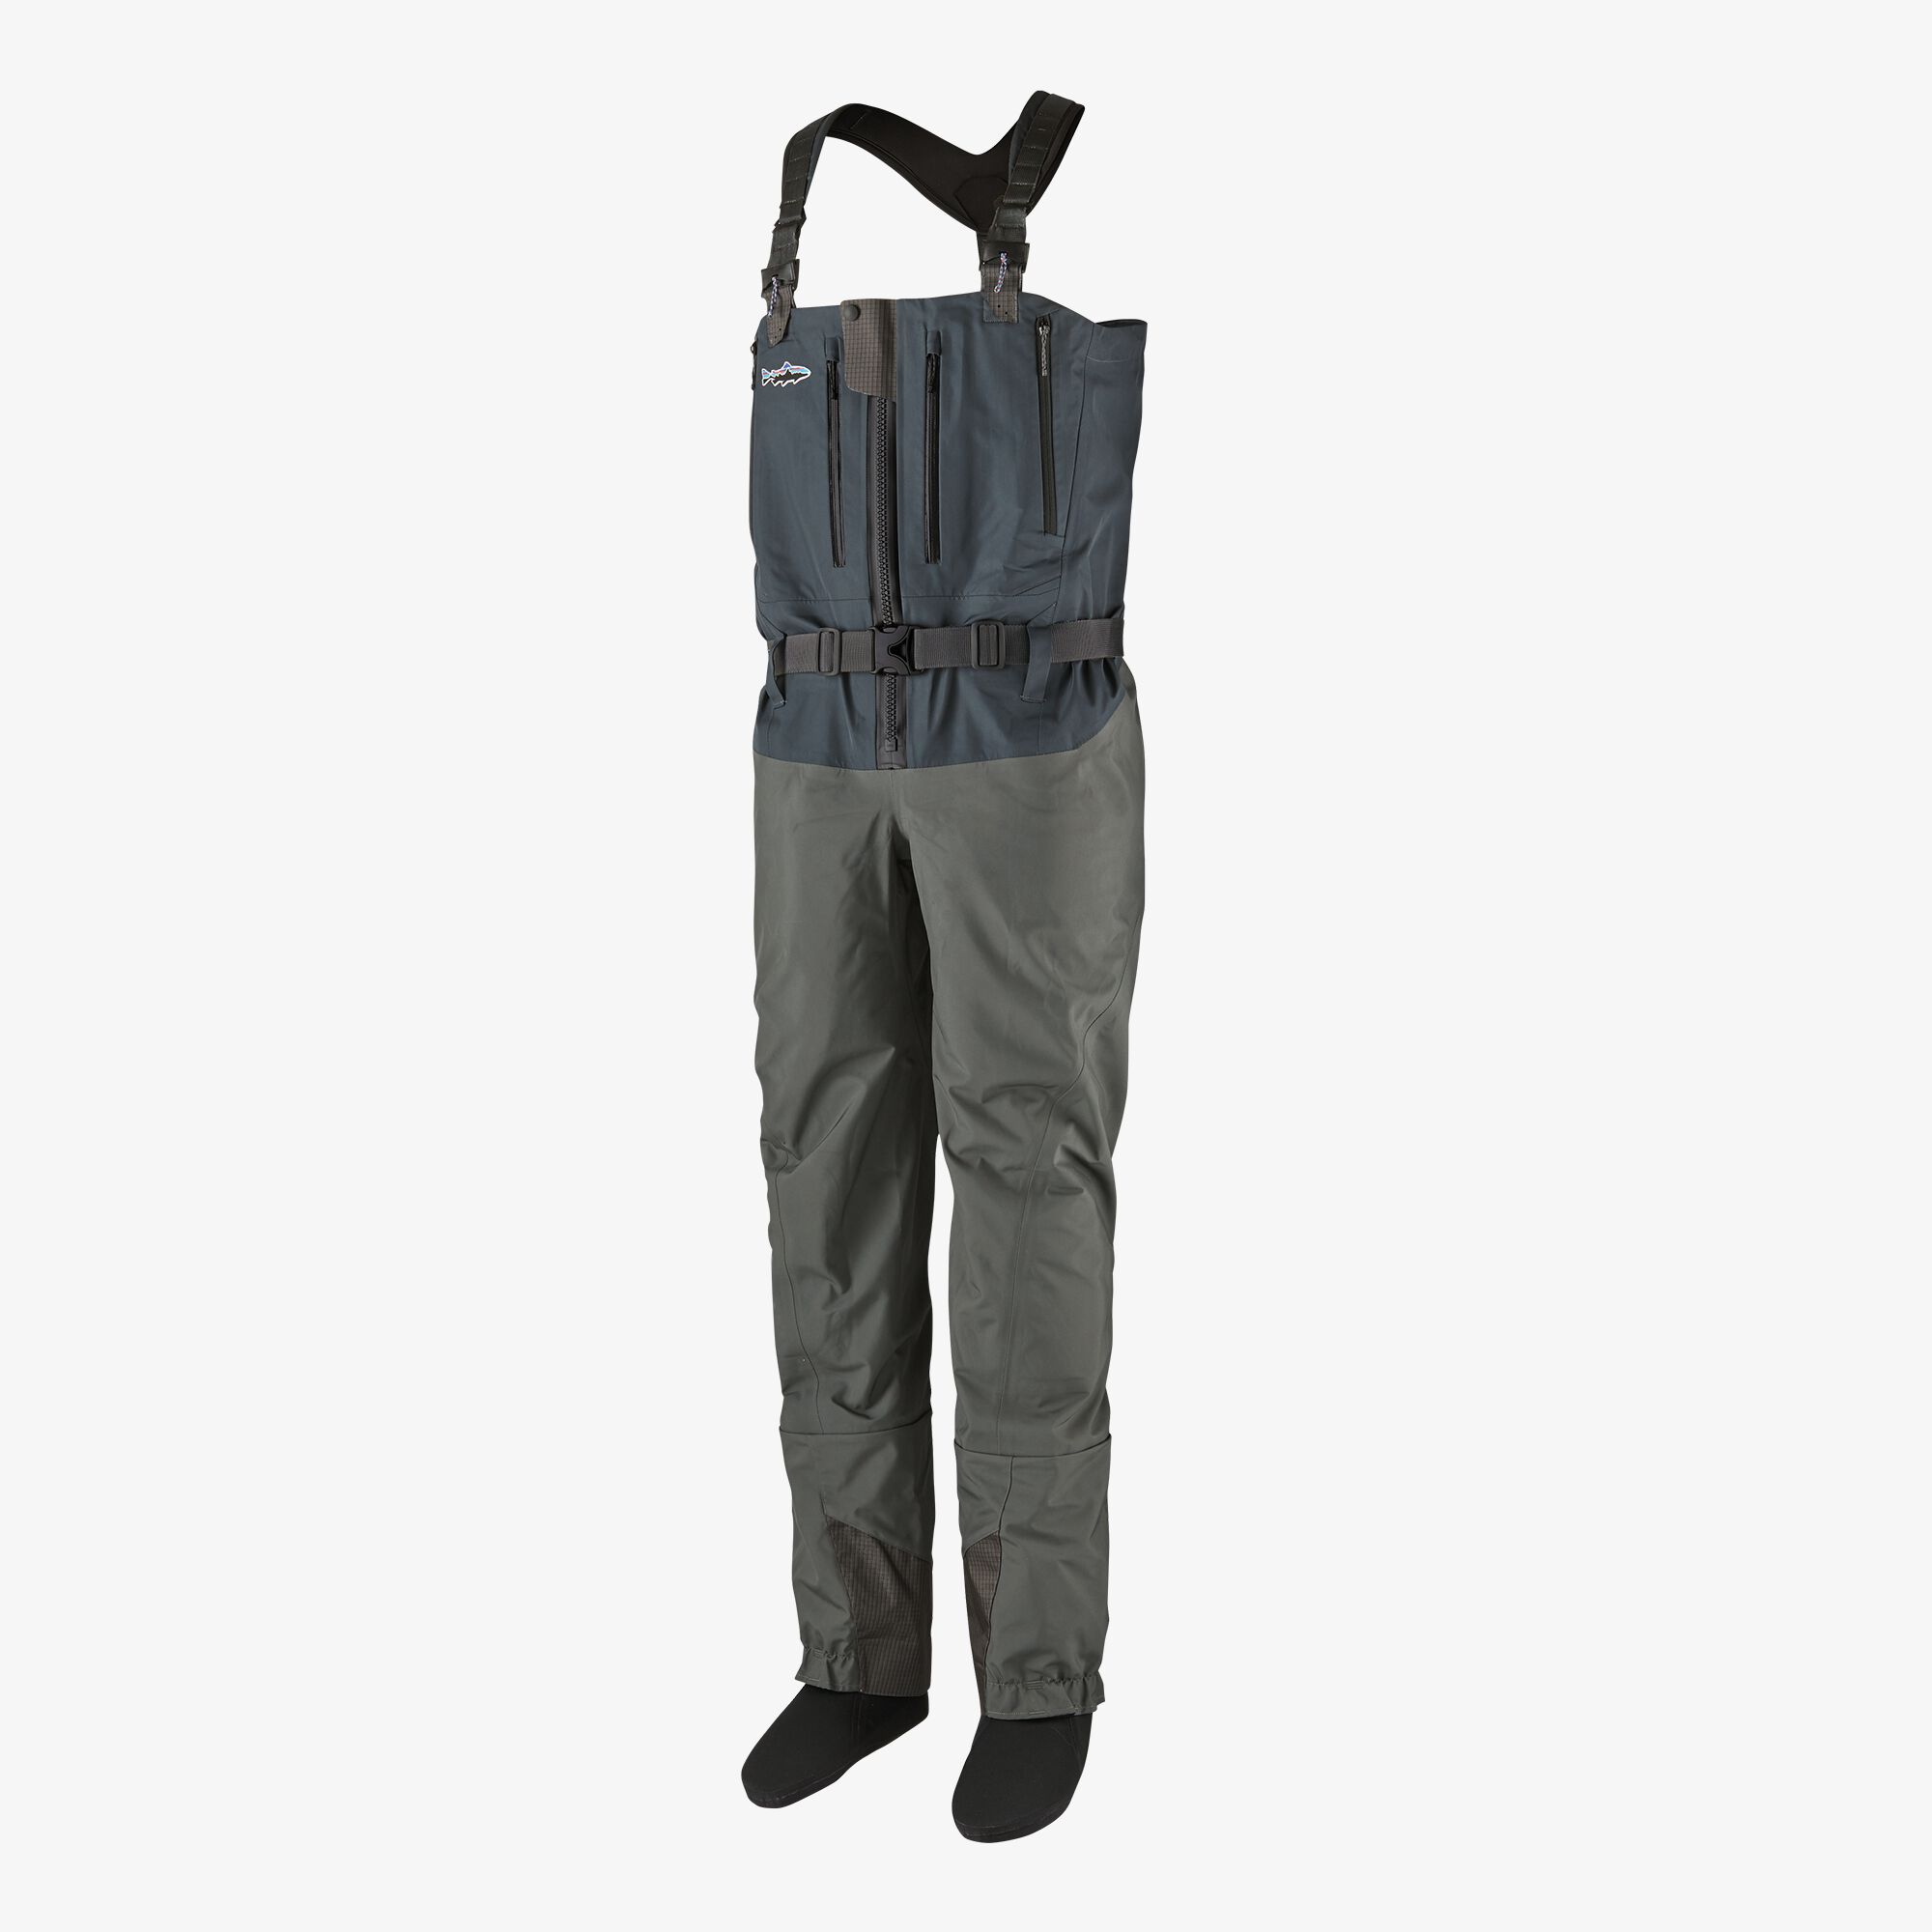 PATAGONIA SWIFTCURRENT EXPEDITION ZIP-FRONT WADER - FORGE GREY - LRL